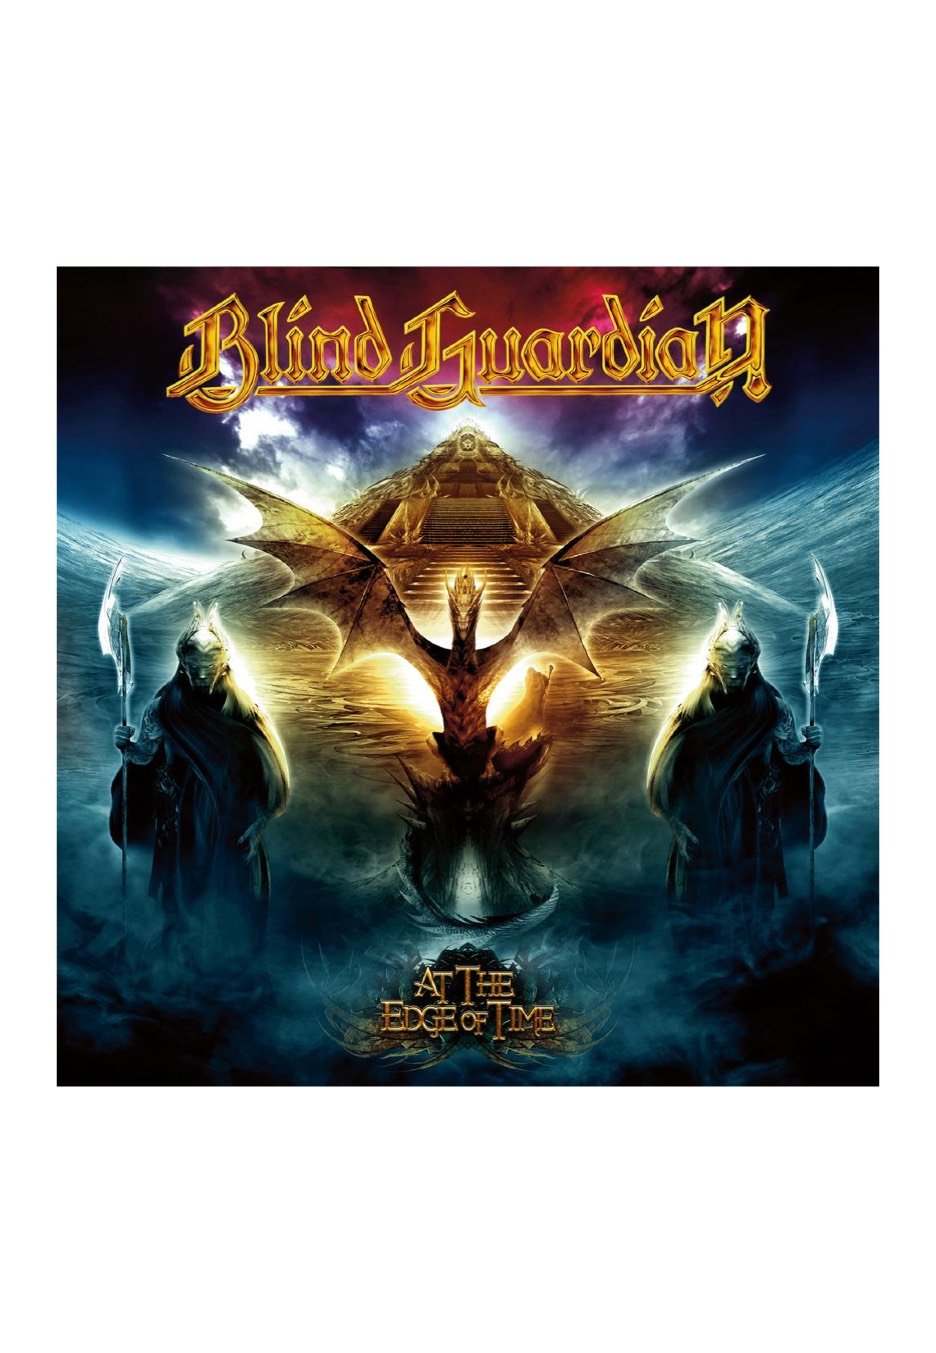 Blind Guardian - At The Edge Of Time - CD